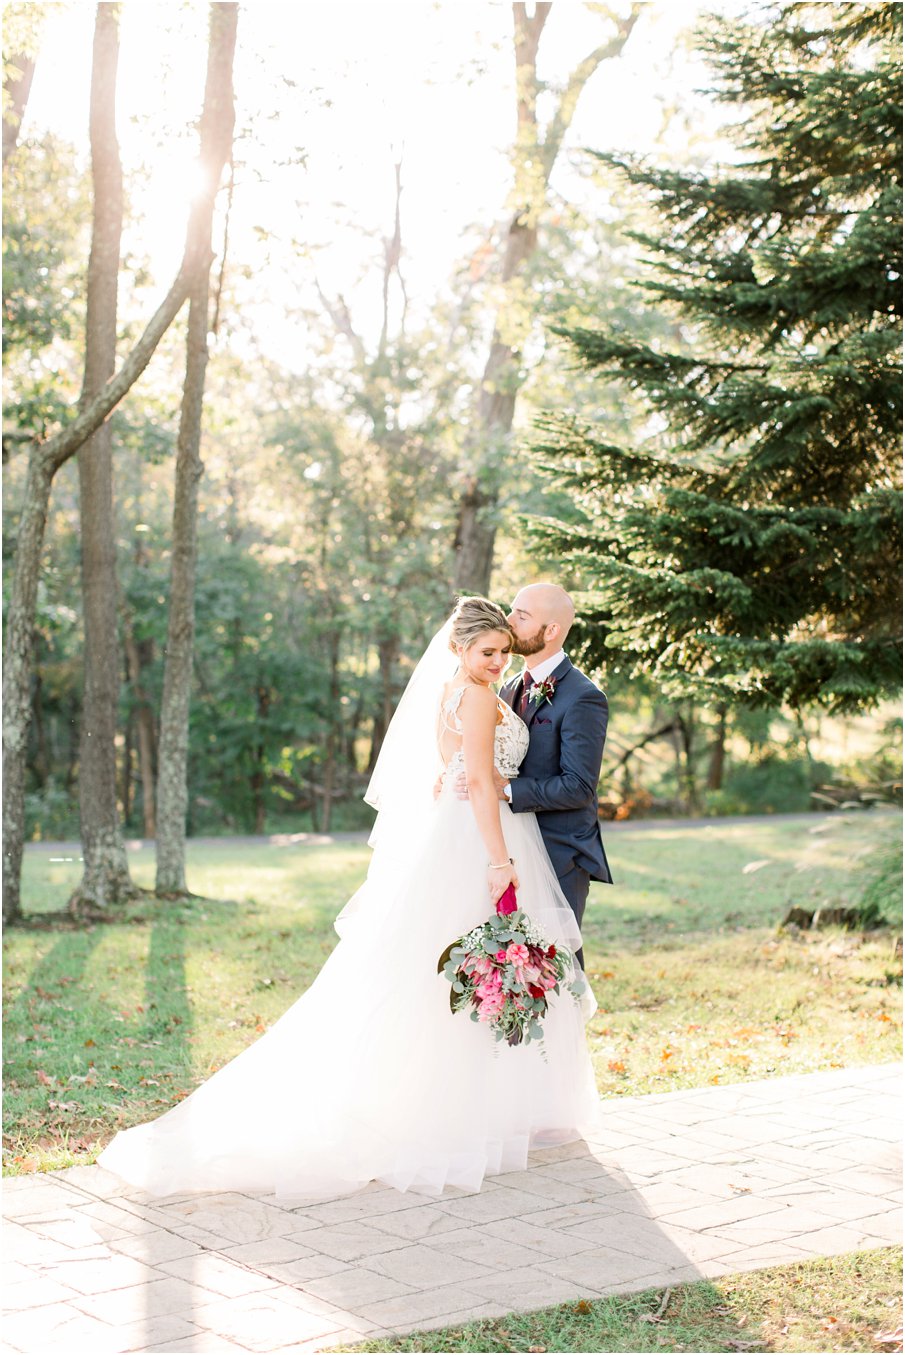 Bride and Groom during sunset at their Rust Manor House wedding. Navy suit, Hayley Paige wedding dress, and burgundy floral accents